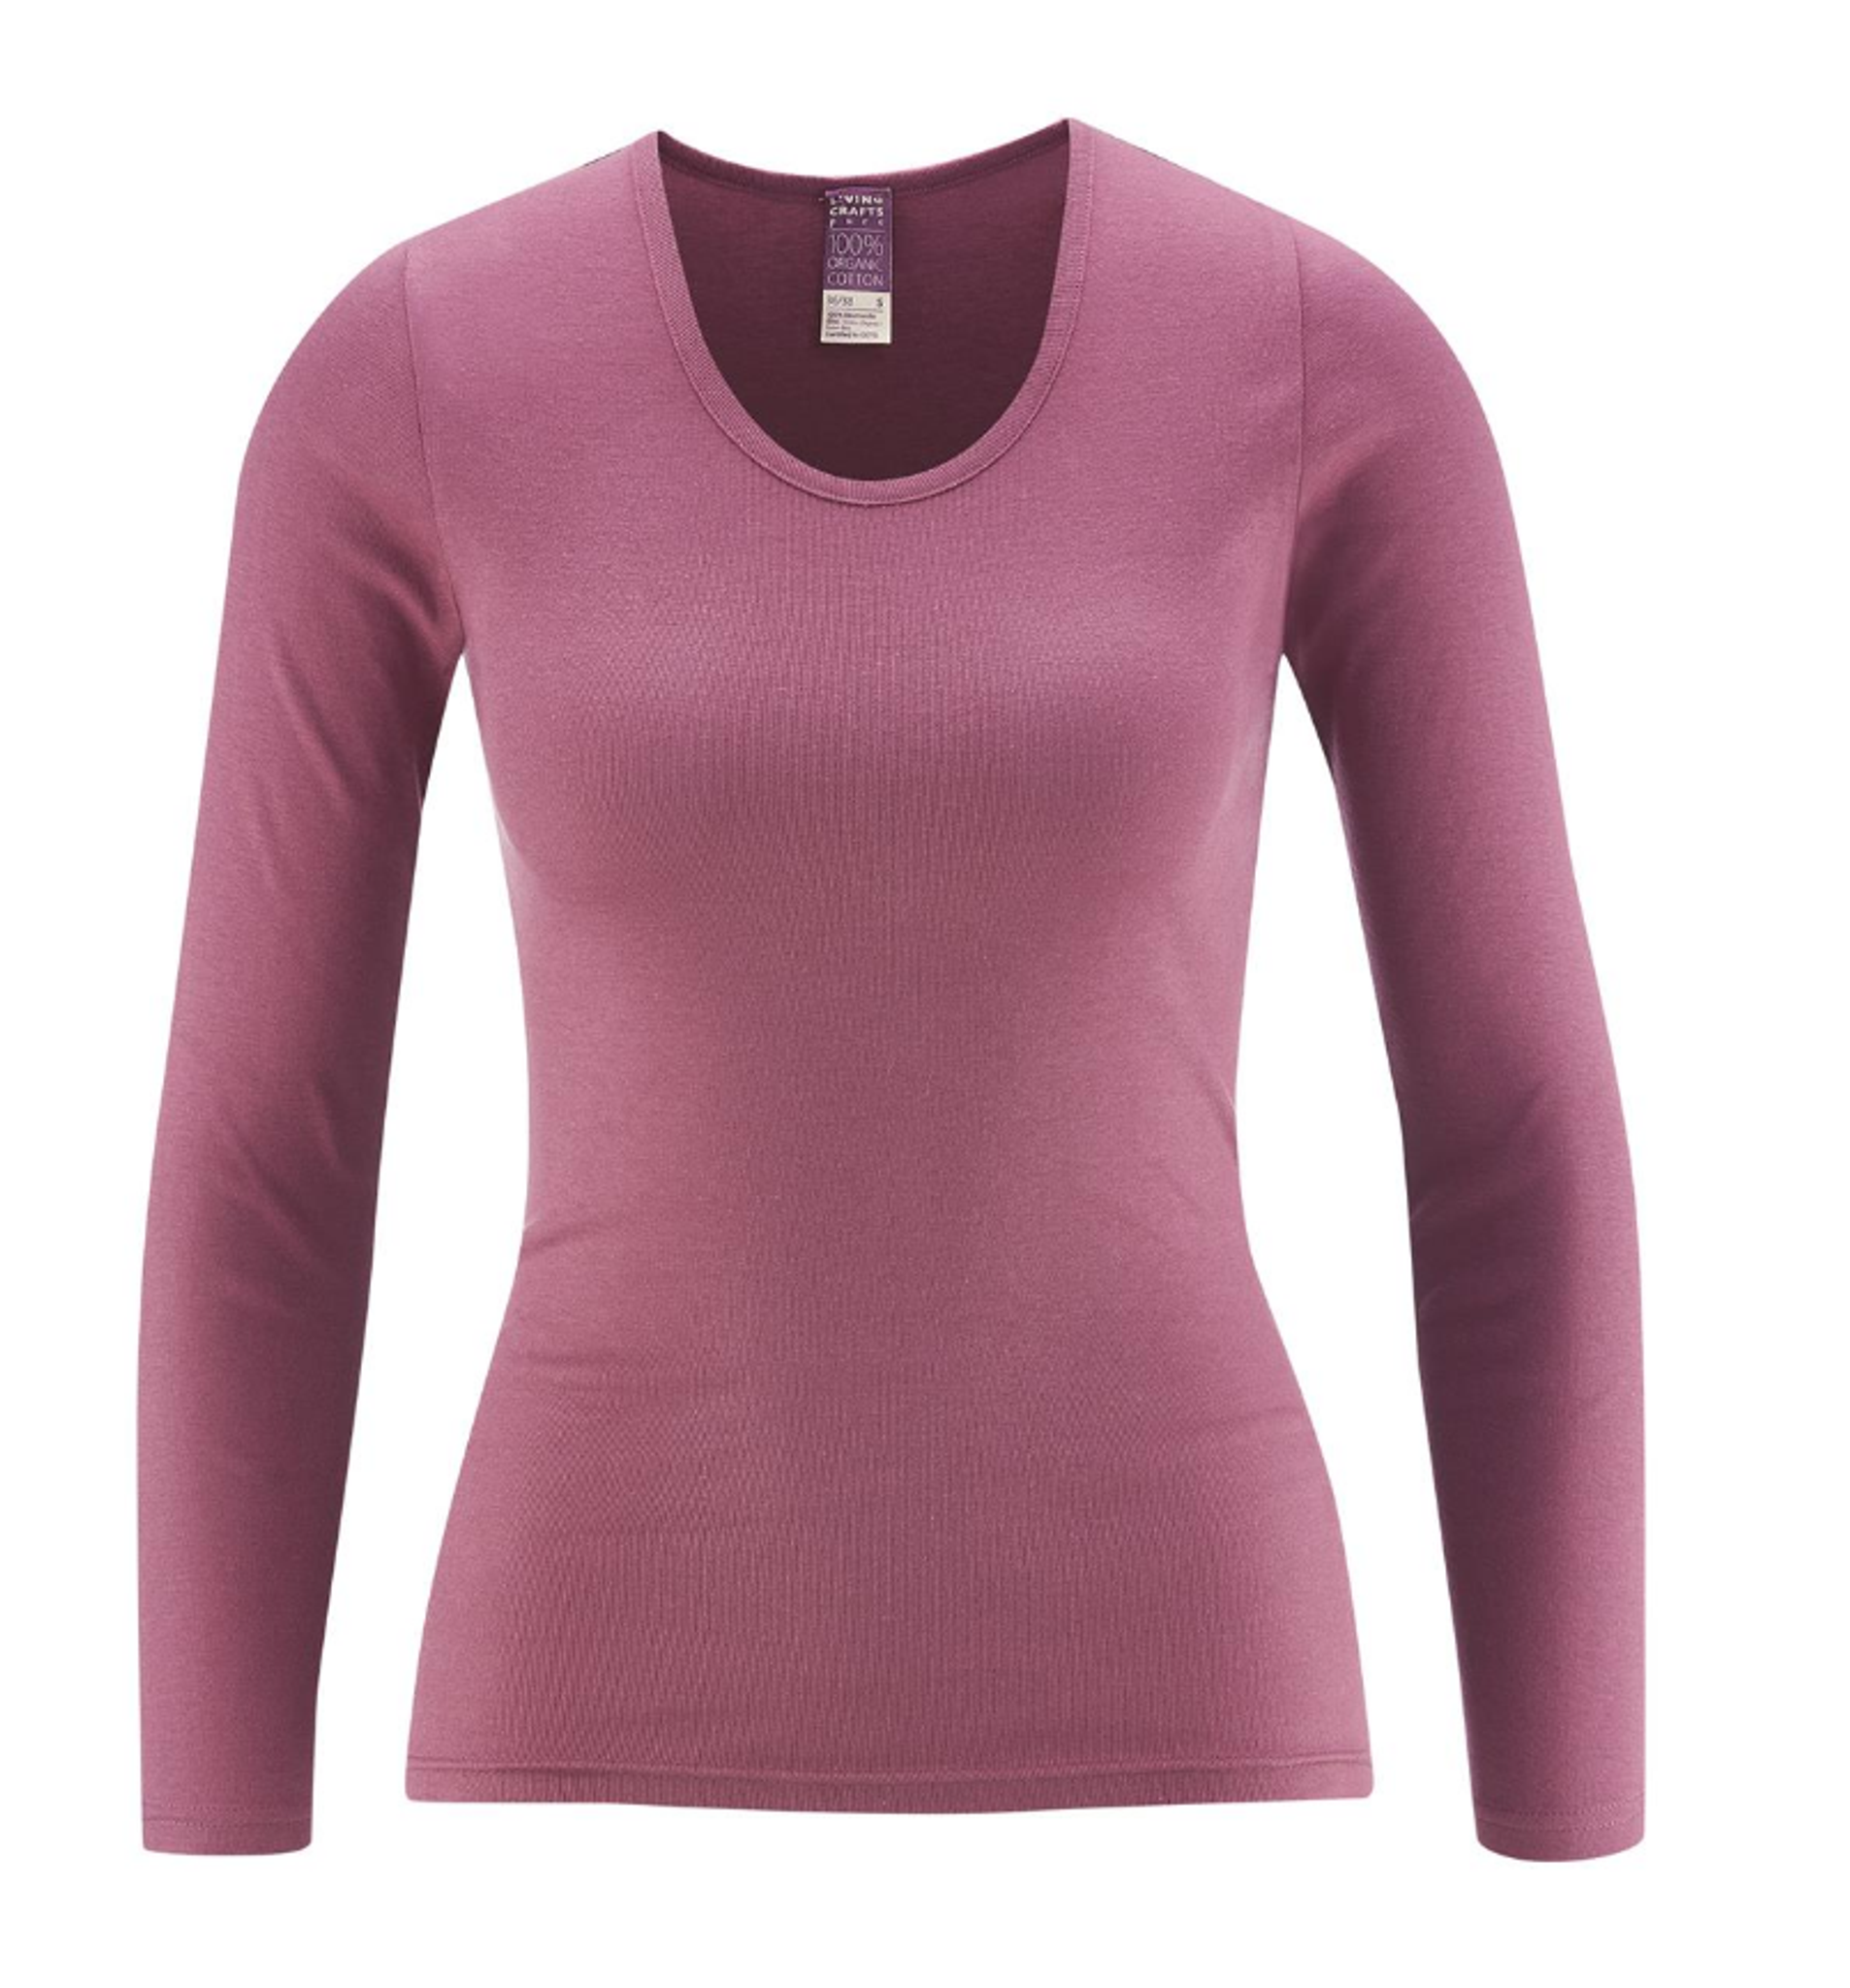 Buy Girls' Long Sleeve Casual 100% Cotton Shirts Online